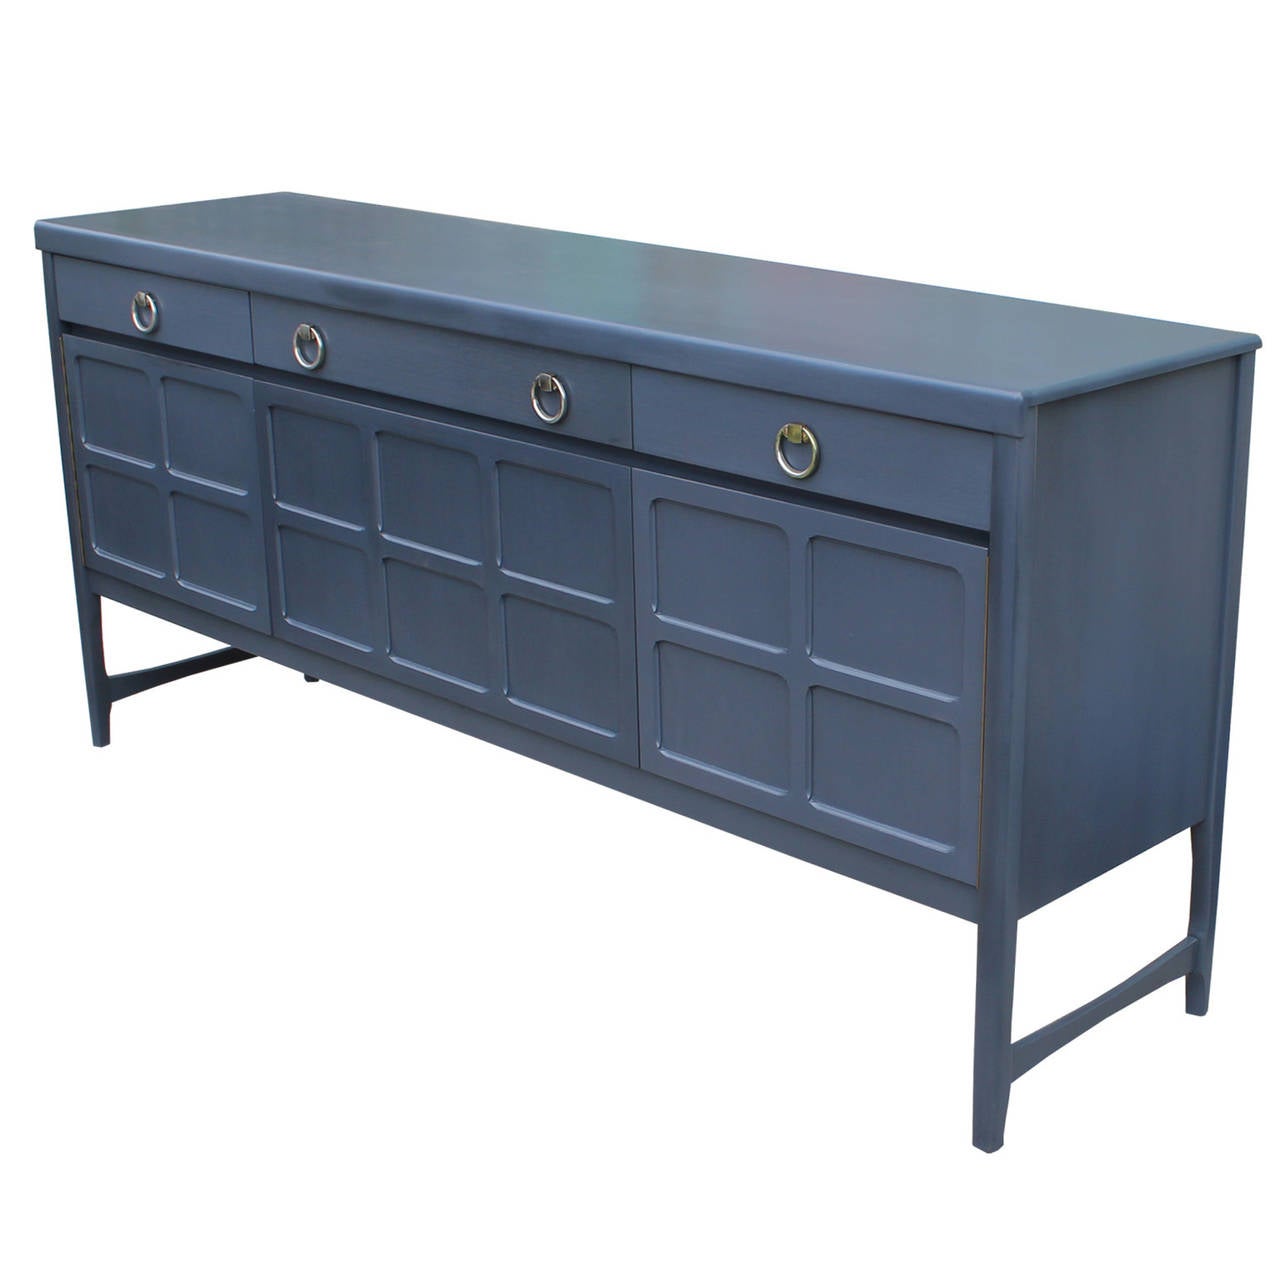 Grey sideboard with chrome handles. Sideboard / Credenza is made out of mahogany and teak. The piece has been stained a beautiful French Blue Grey color fully restored. Front middle cabinet door drops down.

Two available.